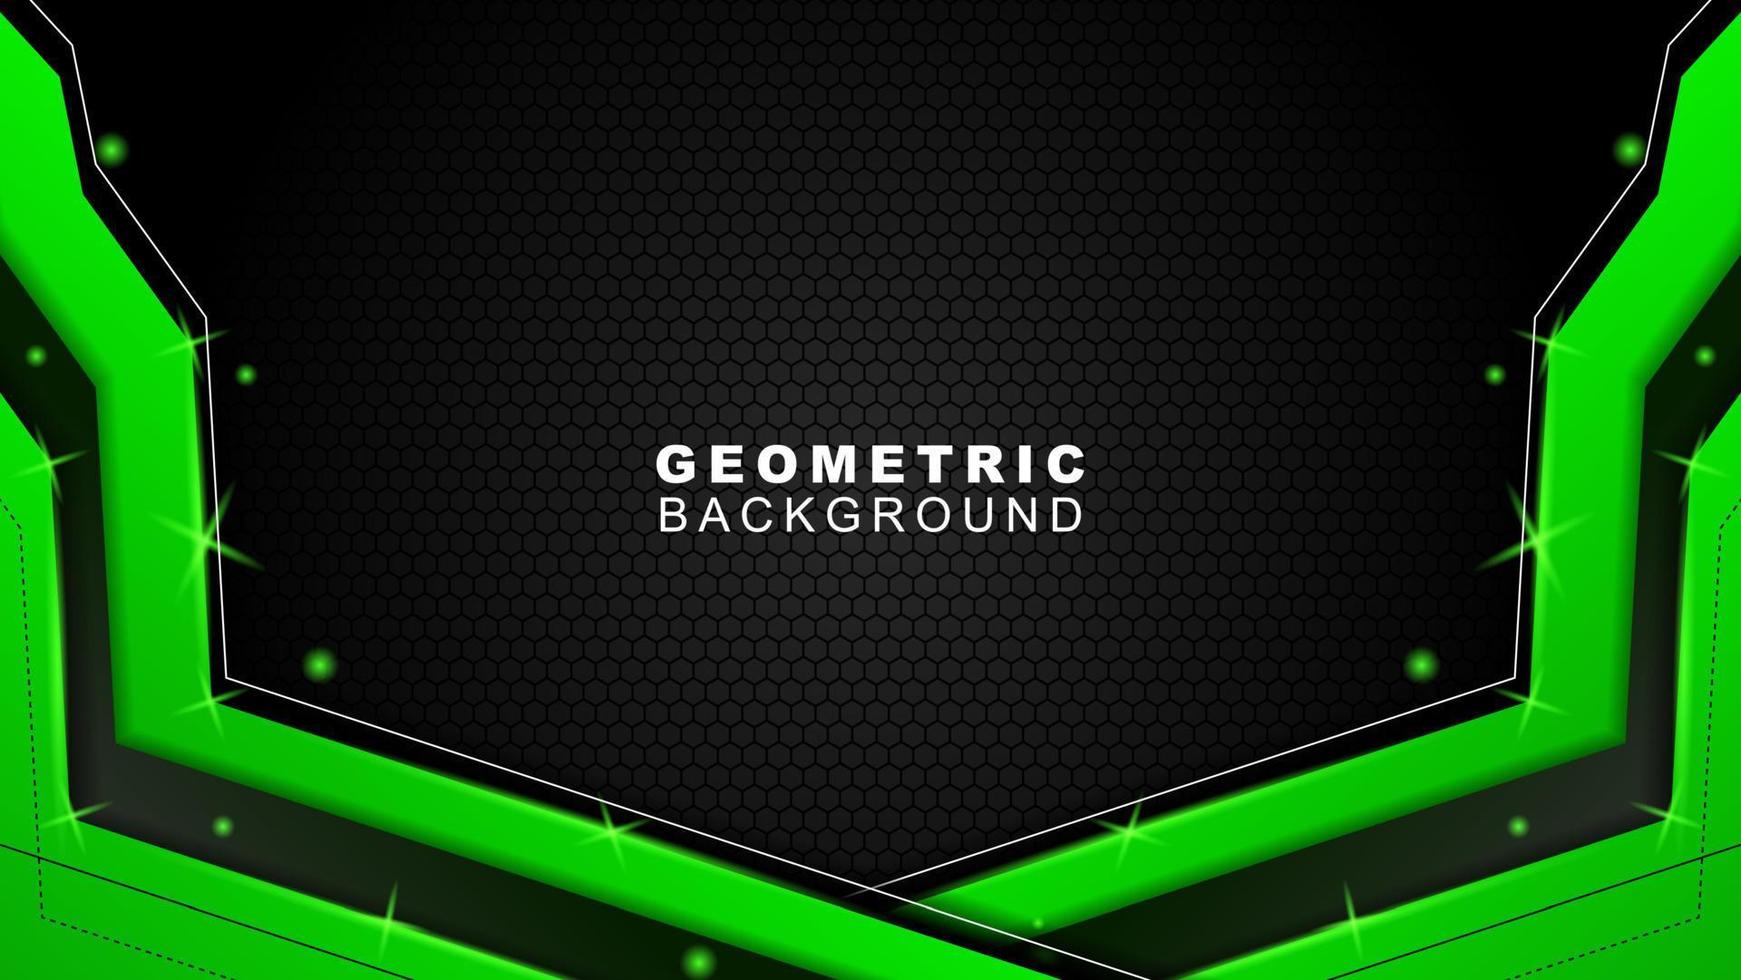 Geometric background in green and black with a hexagon pattern style, background for offline streaming, advertisements, banners, and others vector